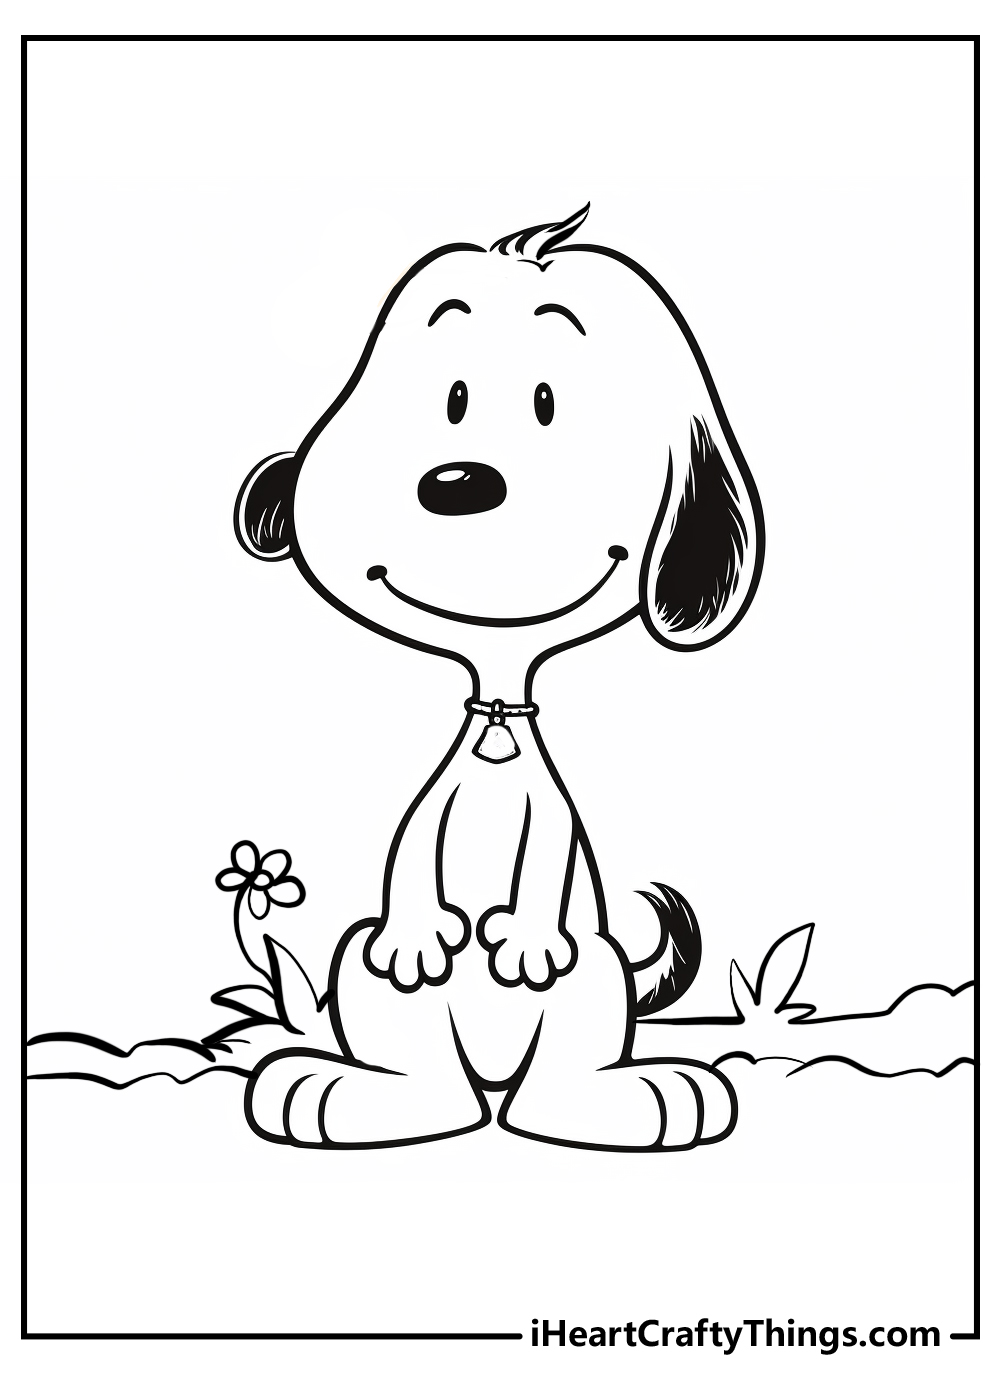 snoopy coloring pages